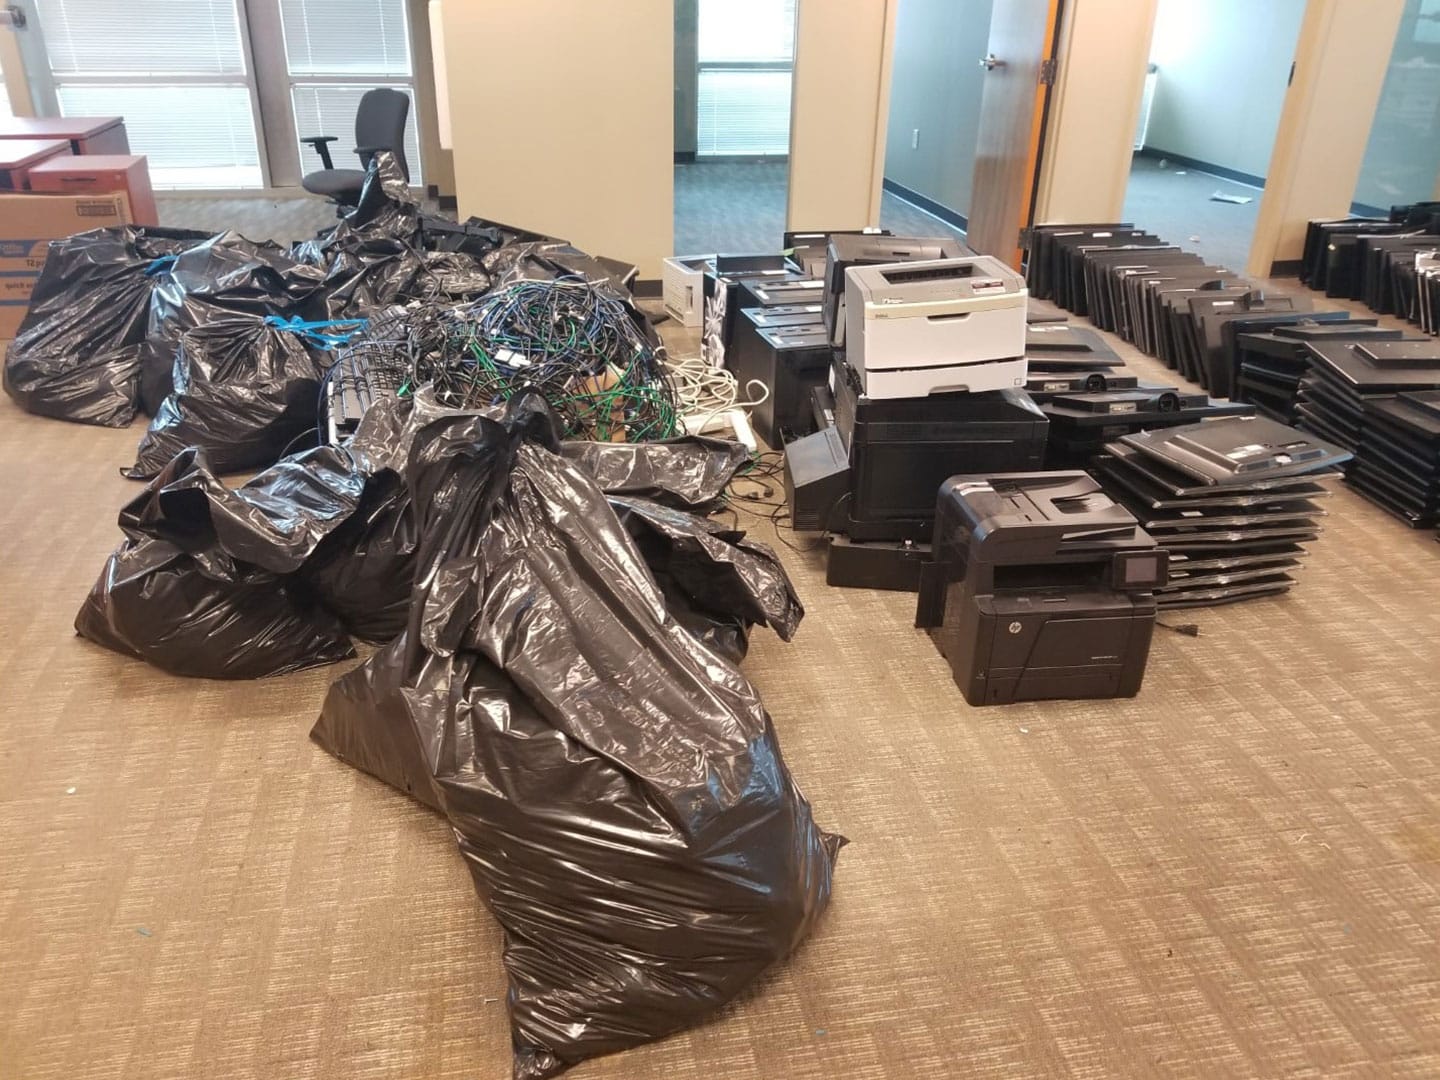 Free Electronics Recycling Service For Obsolete End of Life Equipment Atlanta, GA